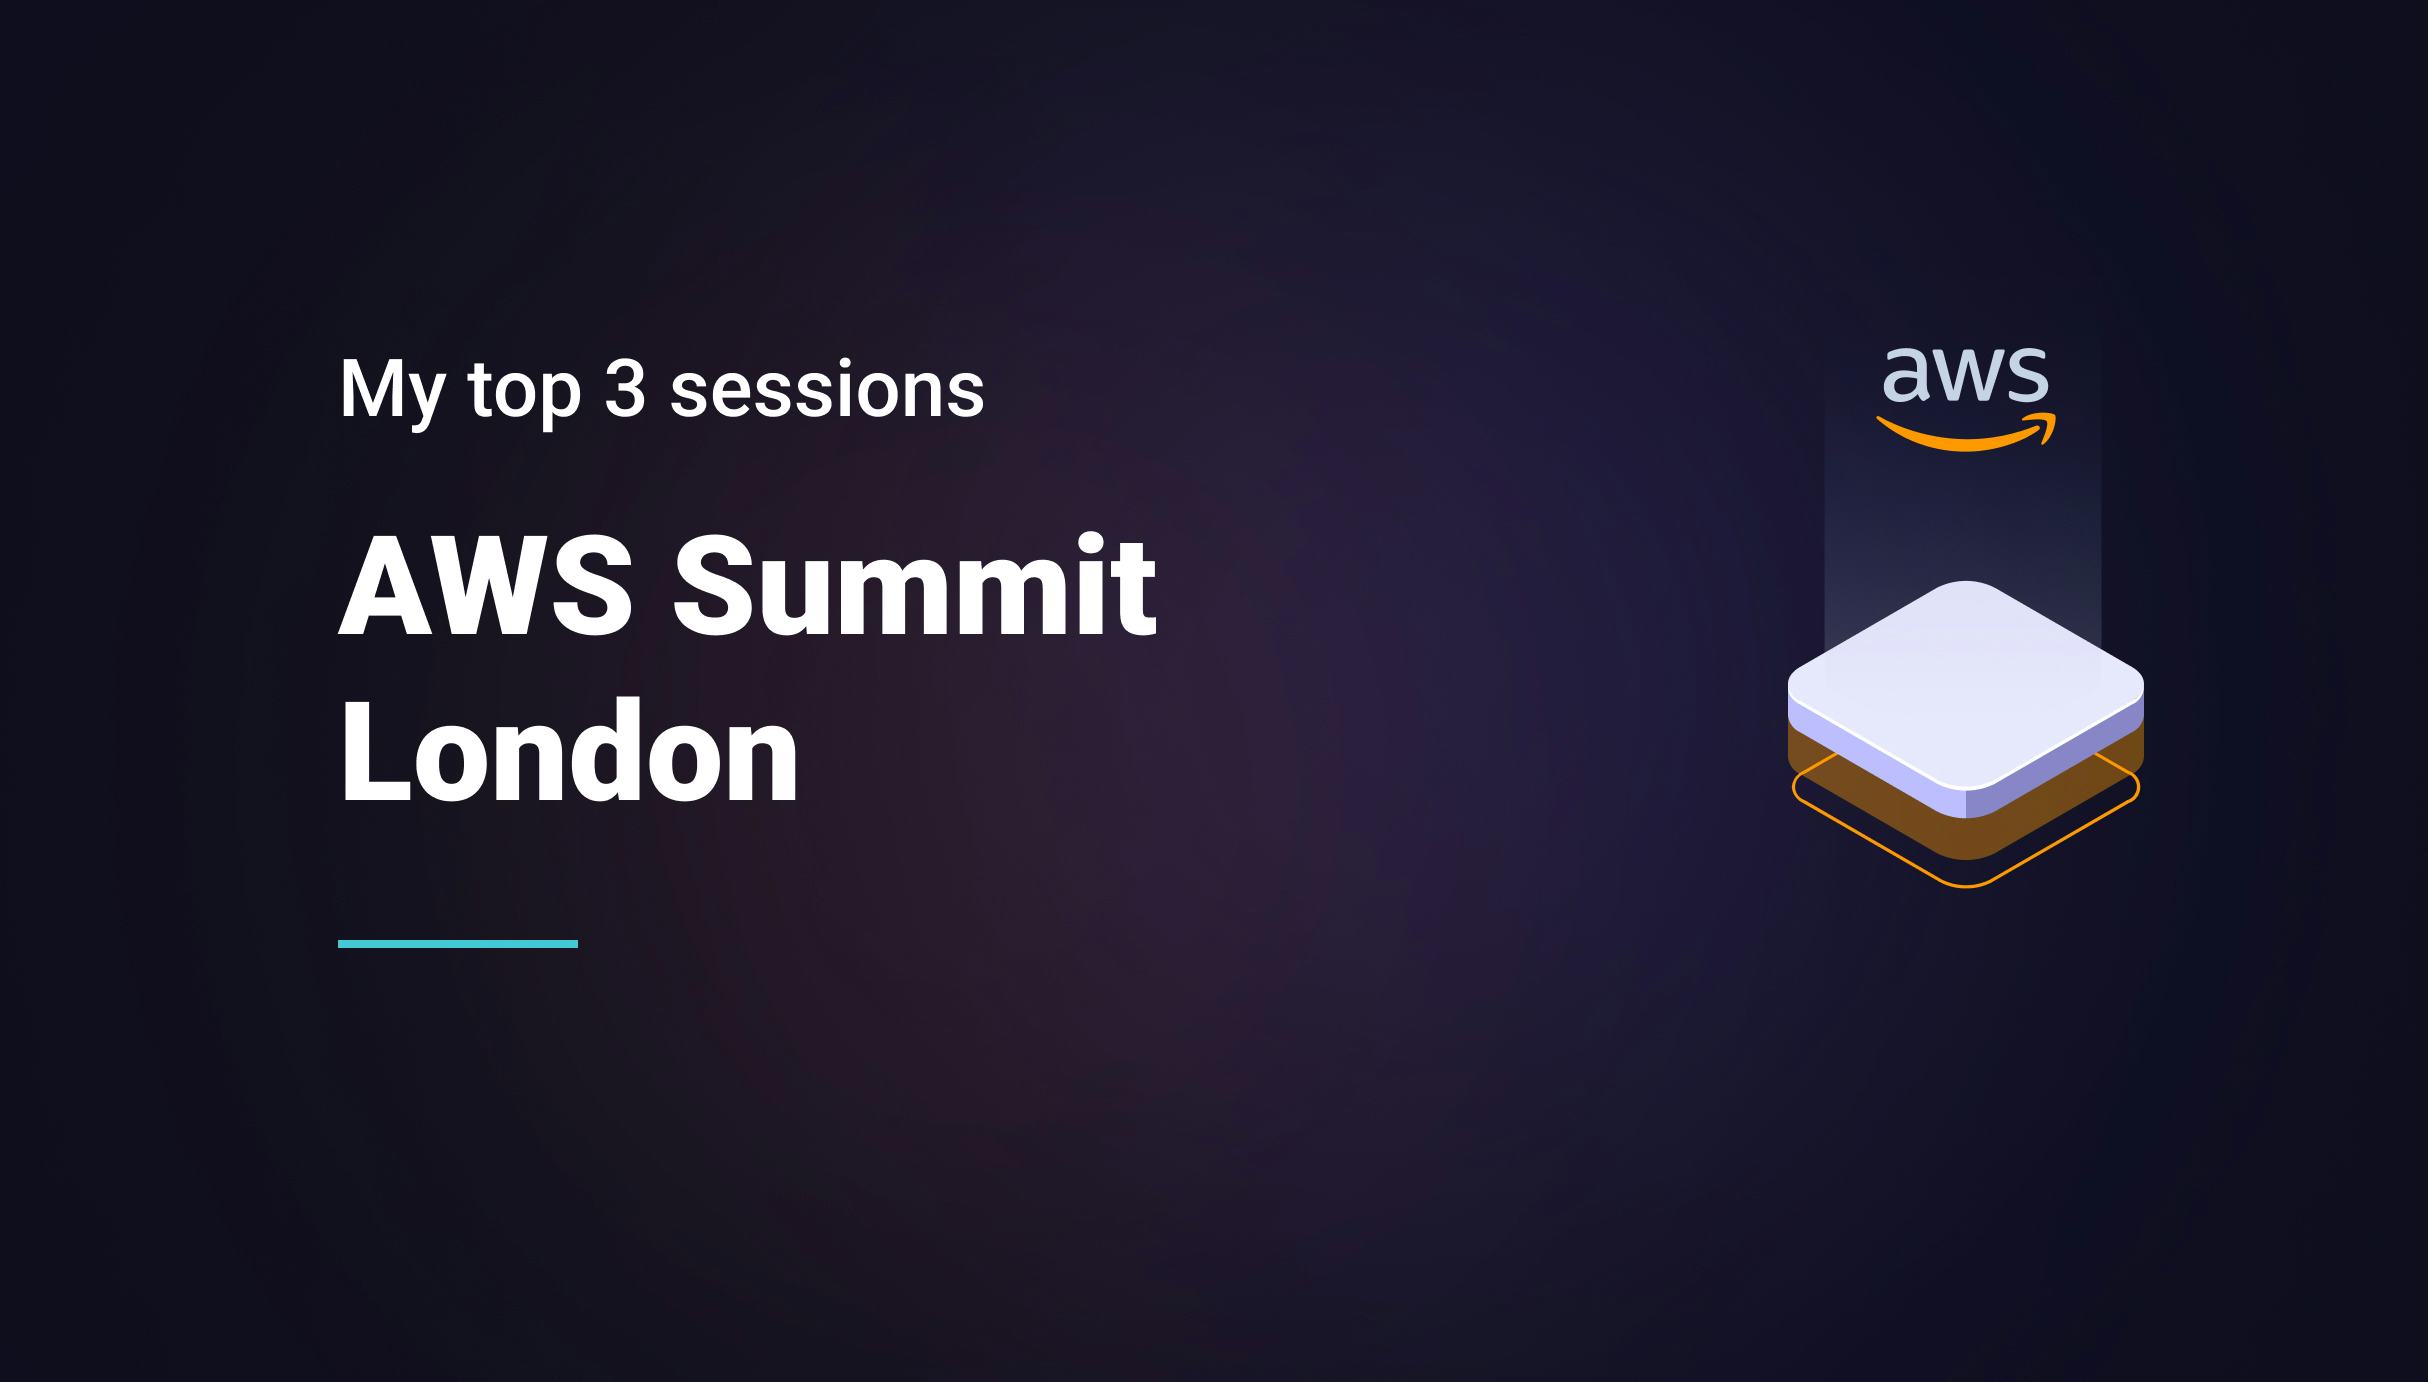 AWS Summit London - My top 3 sessions